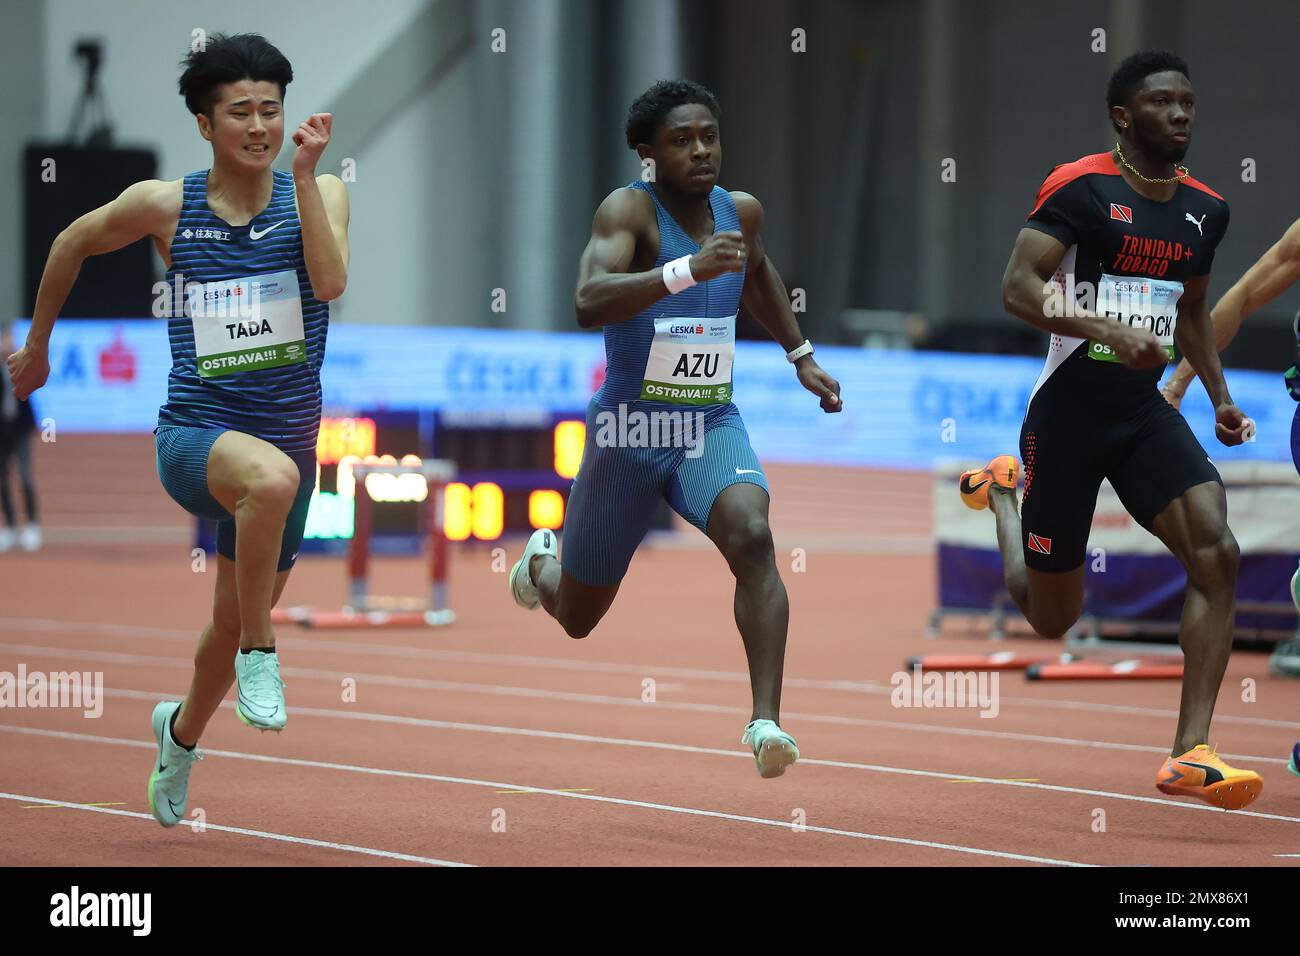 Ostrava, Czech Republic. 02nd Feb, 2023. L-R Shuhei Tada from Japan, Jeremiah Azu from Britain and Jerod Elcock from Trinidad and Tobago compete in men's 60 metres race during the Czech Indoor Gala athletics meeting of the silver category of the World Indoor Tour, on February 2, 2023, in Ostrava, Czech Republic. Credit: Petr Sznapka/CTK Photo/Alamy Live News Stock Photo